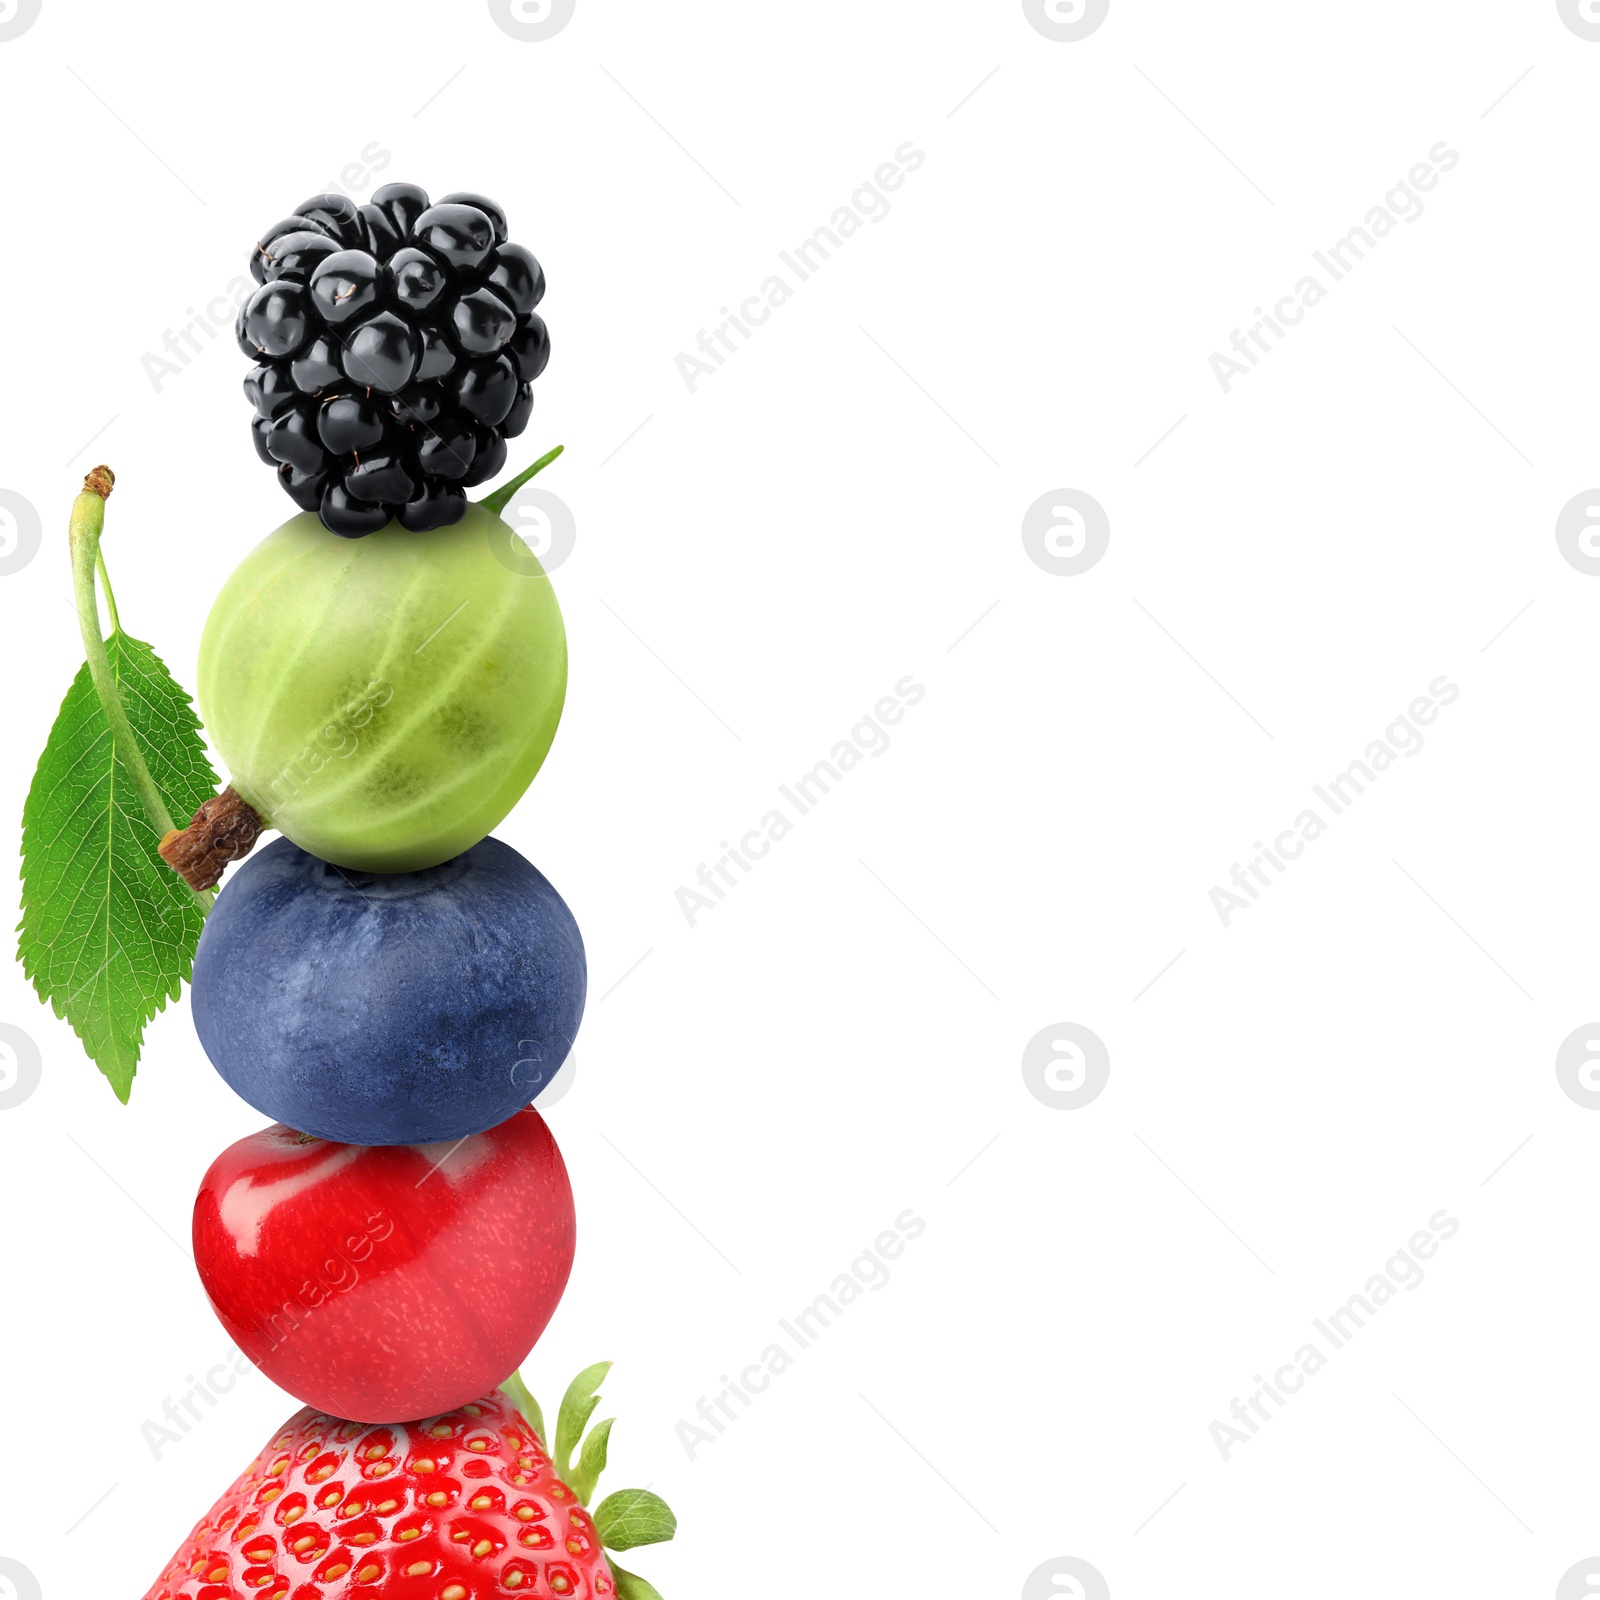 Image of Stack of different fresh tasty berries and cherry on white background